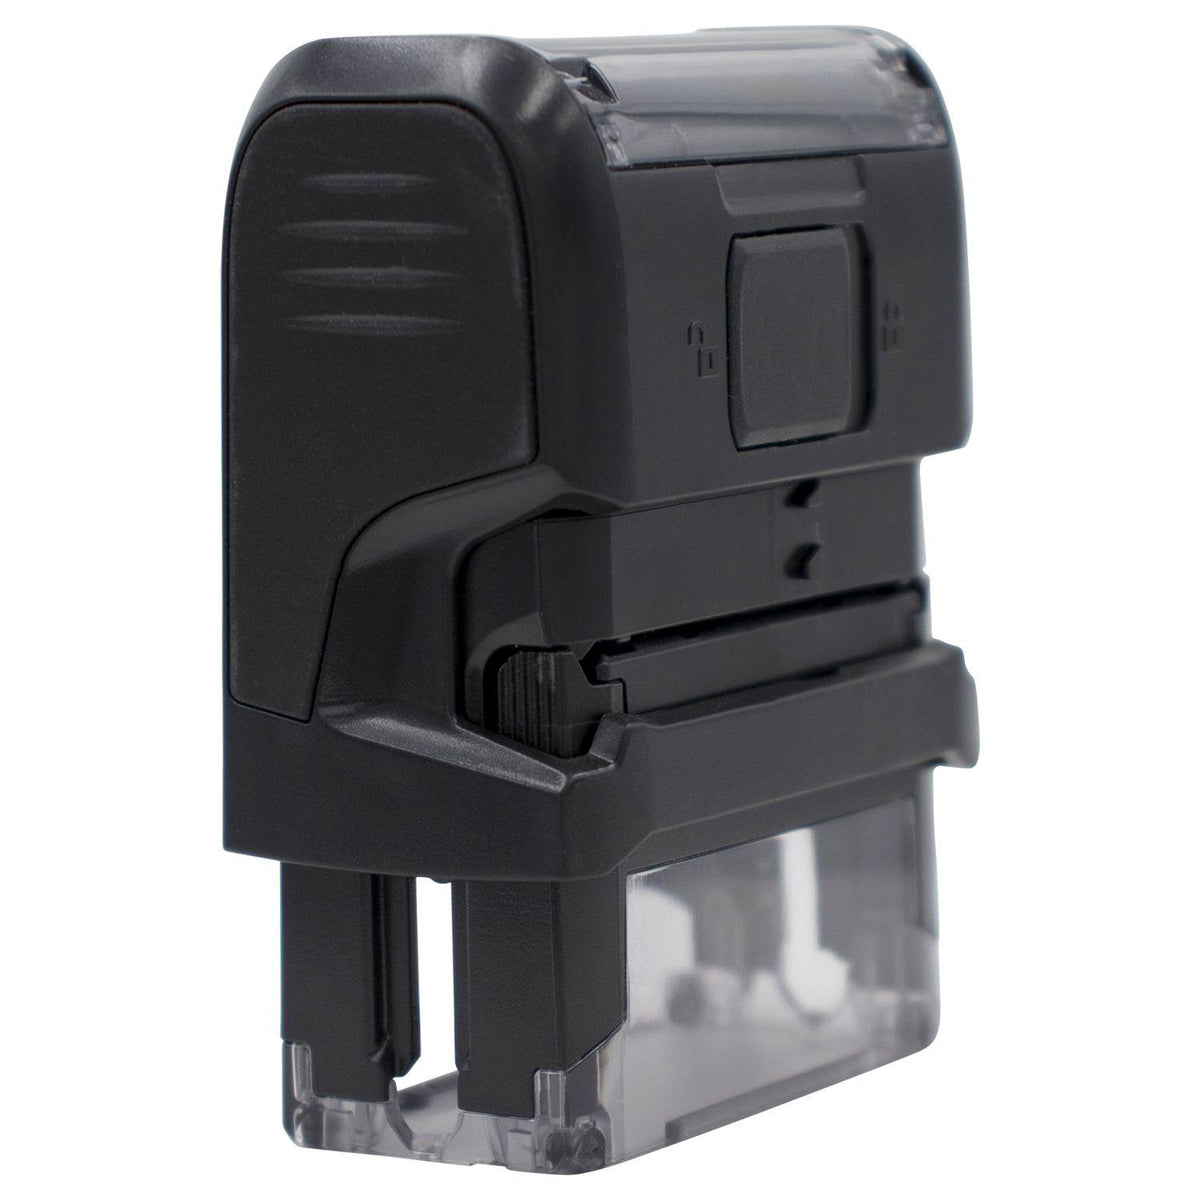 Self-Inking Vacant Stamp - Engineer Seal Stamps - Brand_Trodat, Impression Size_Small, Stamp Type_Self-Inking Stamp, Type of Use_Office, Type of Use_Postal &amp; Mailing